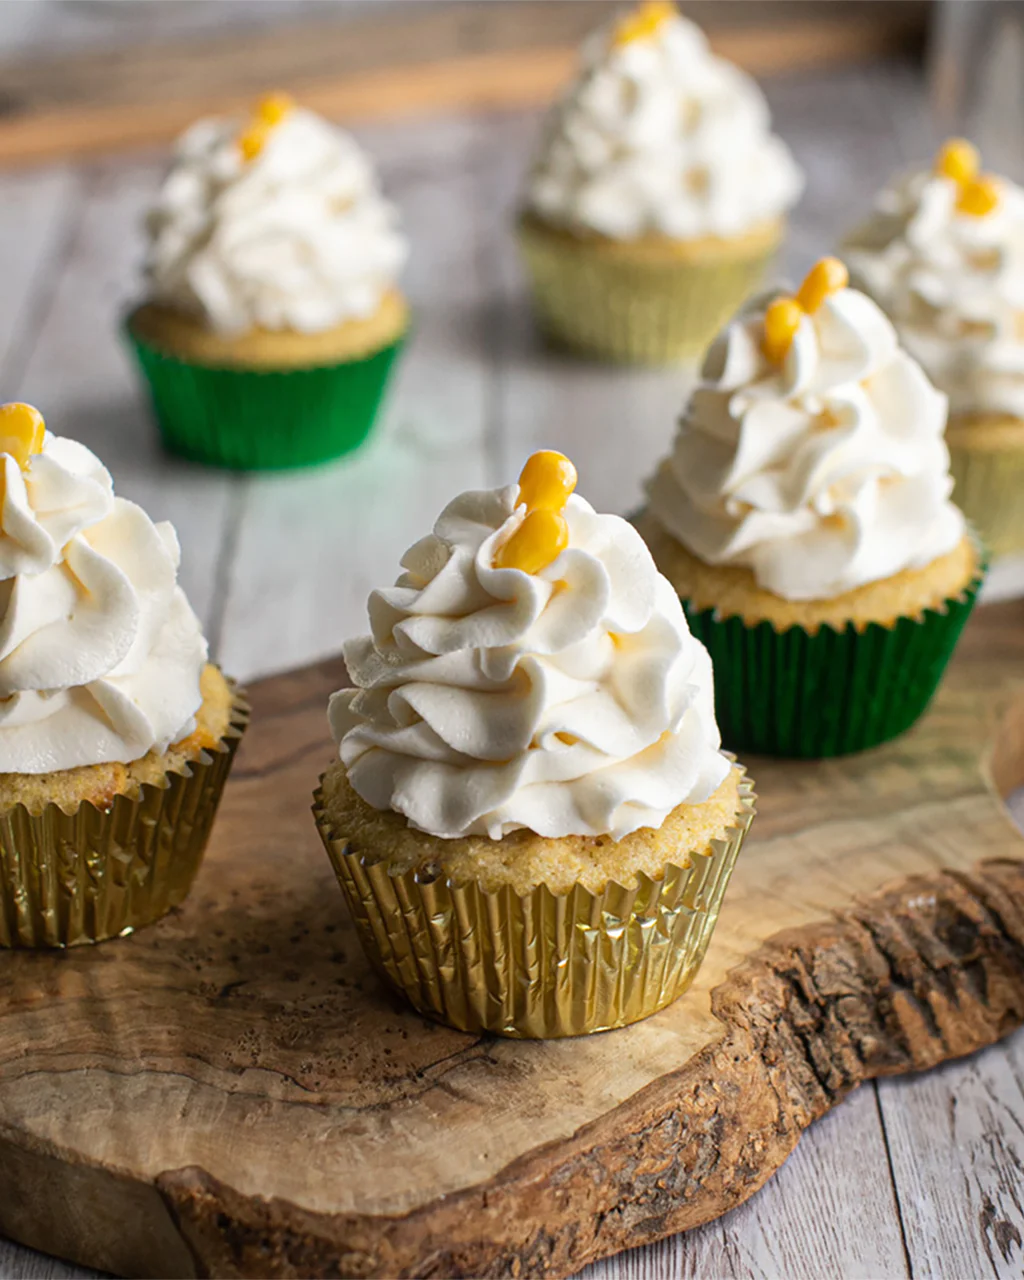 Corn & Hatch Chile Cupcakes with Honey Buttercream